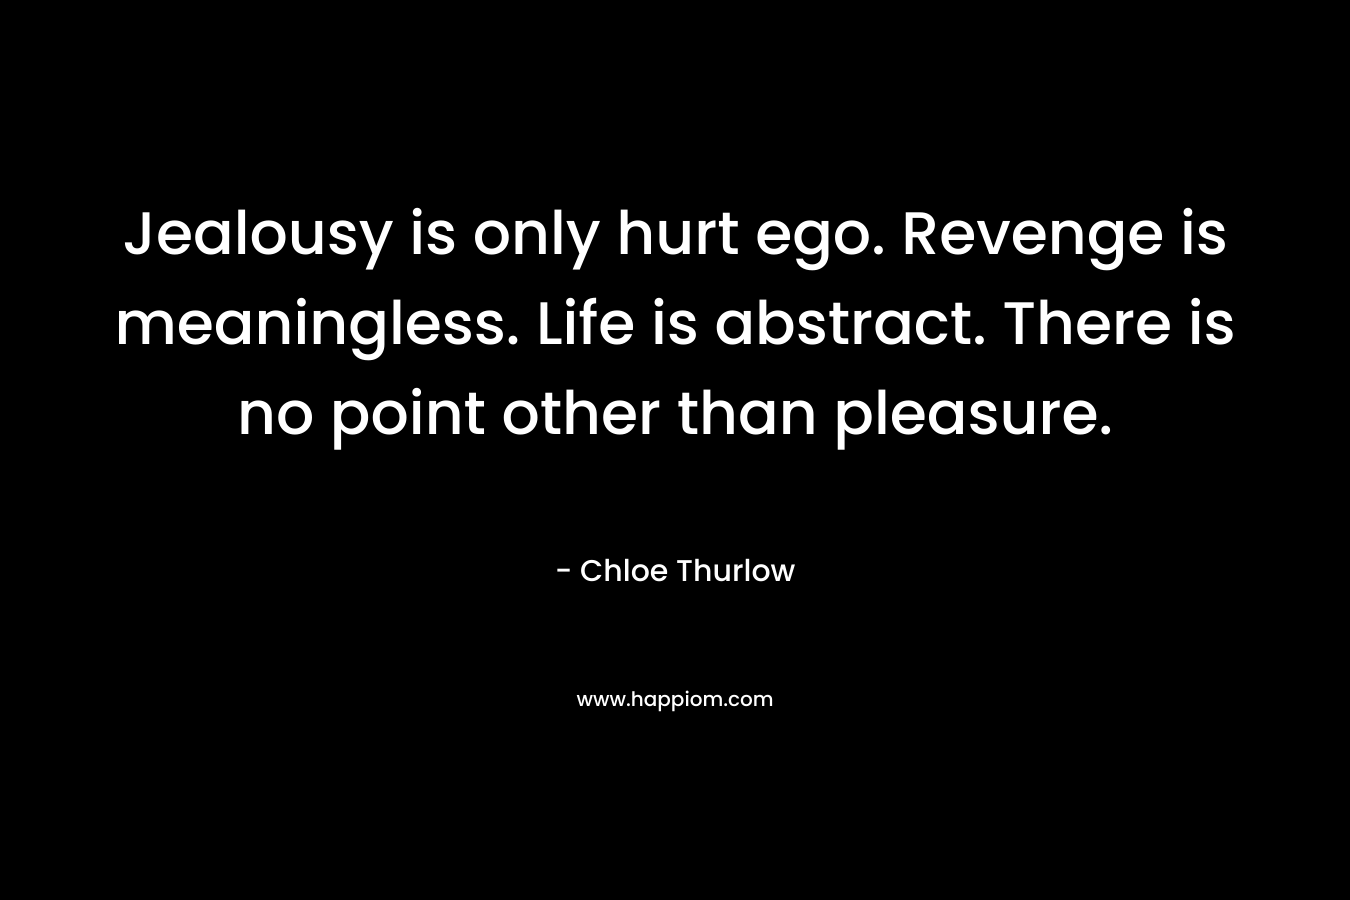 Jealousy is only hurt ego. Revenge is meaningless. Life is abstract. There is no point other than pleasure. – Chloe Thurlow